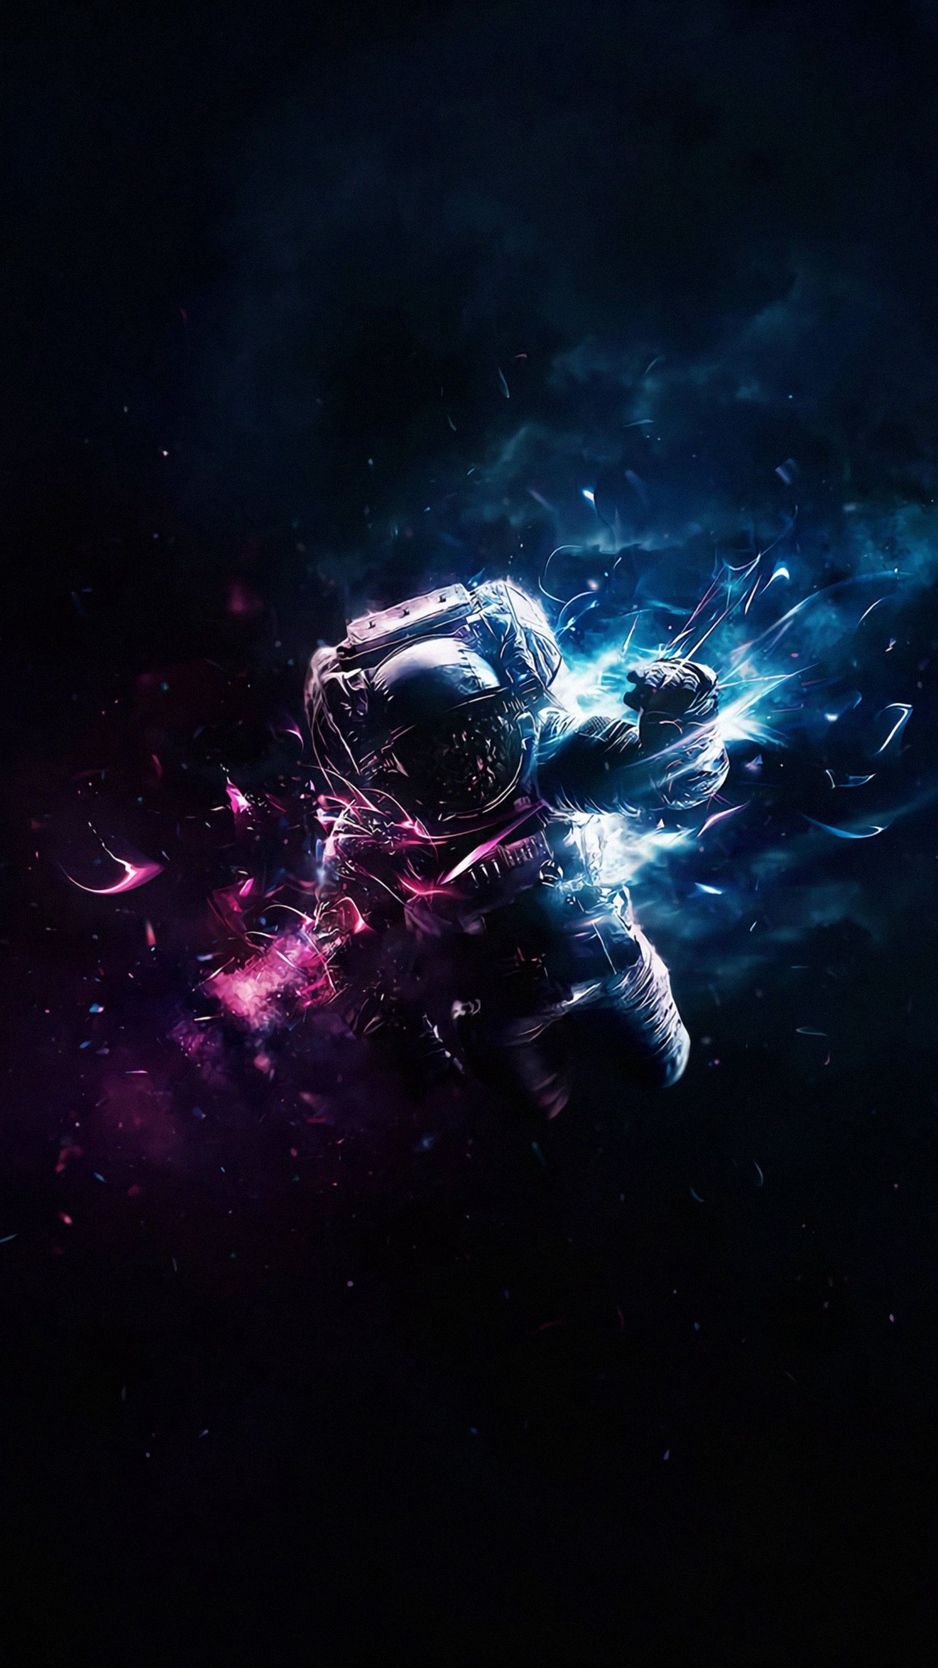 Lonely Astronaut Wallpaper Free Lonely Astronaut Background